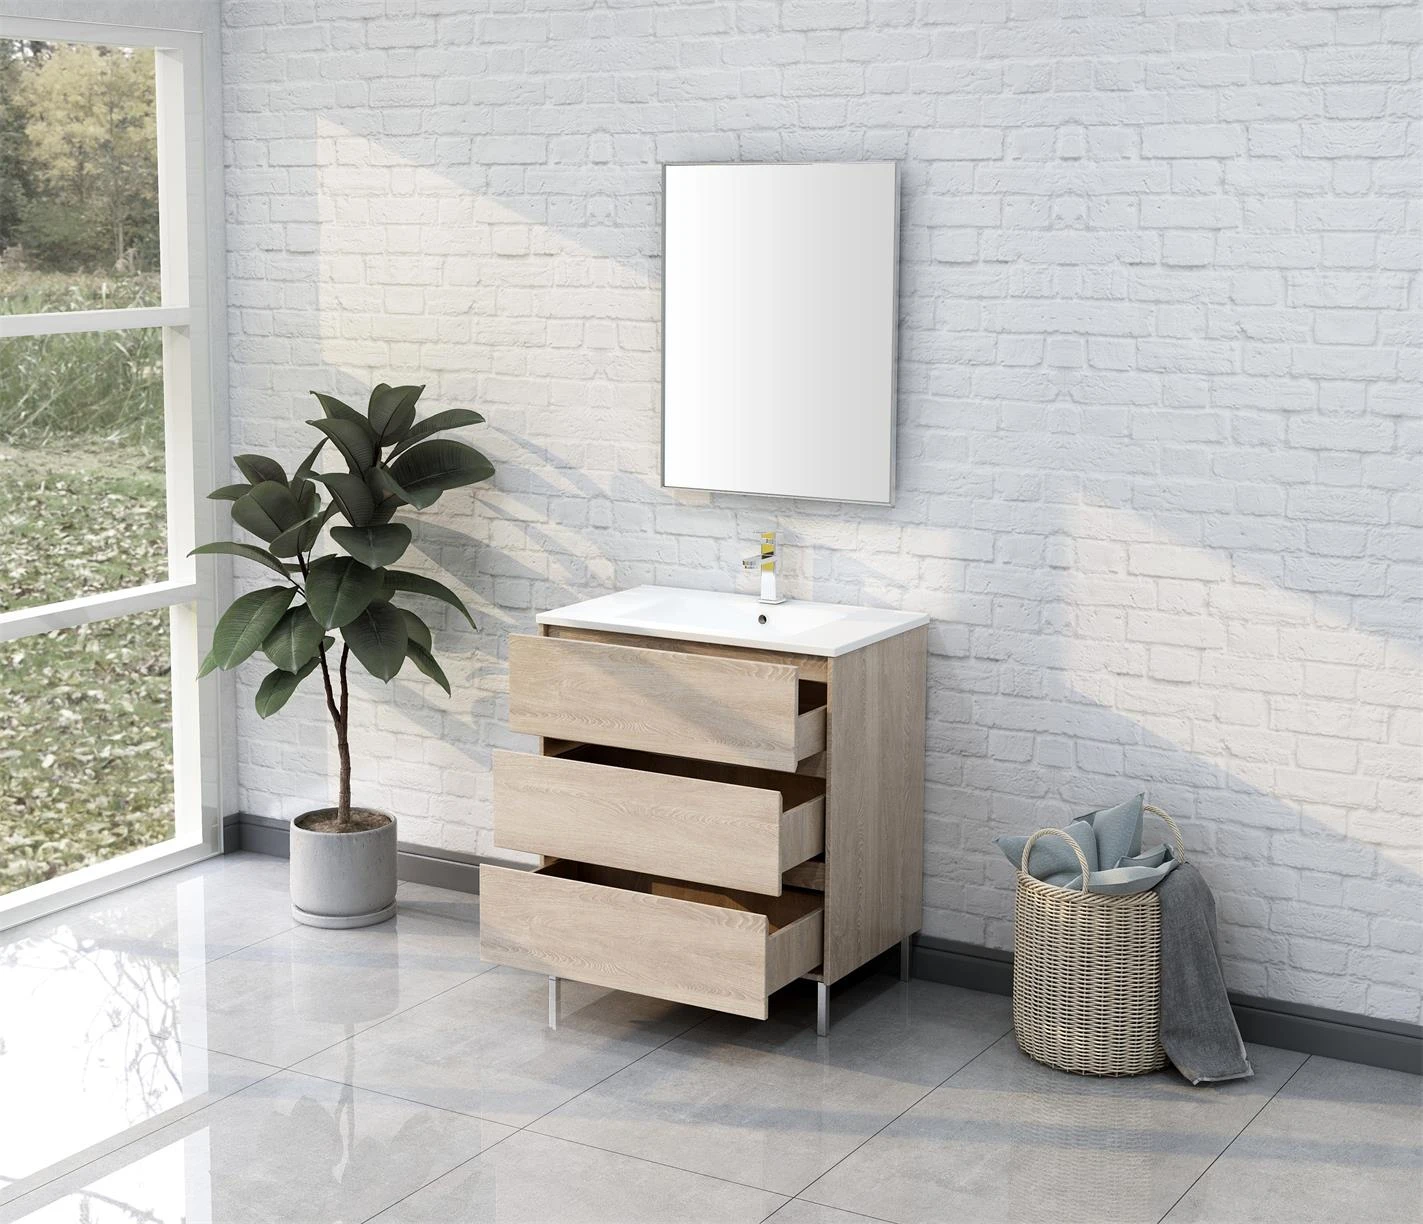 30 Inches Modern Simple Design Floor Mounted High Bathroom Vanity Cabinet with Stainless Metal Feet